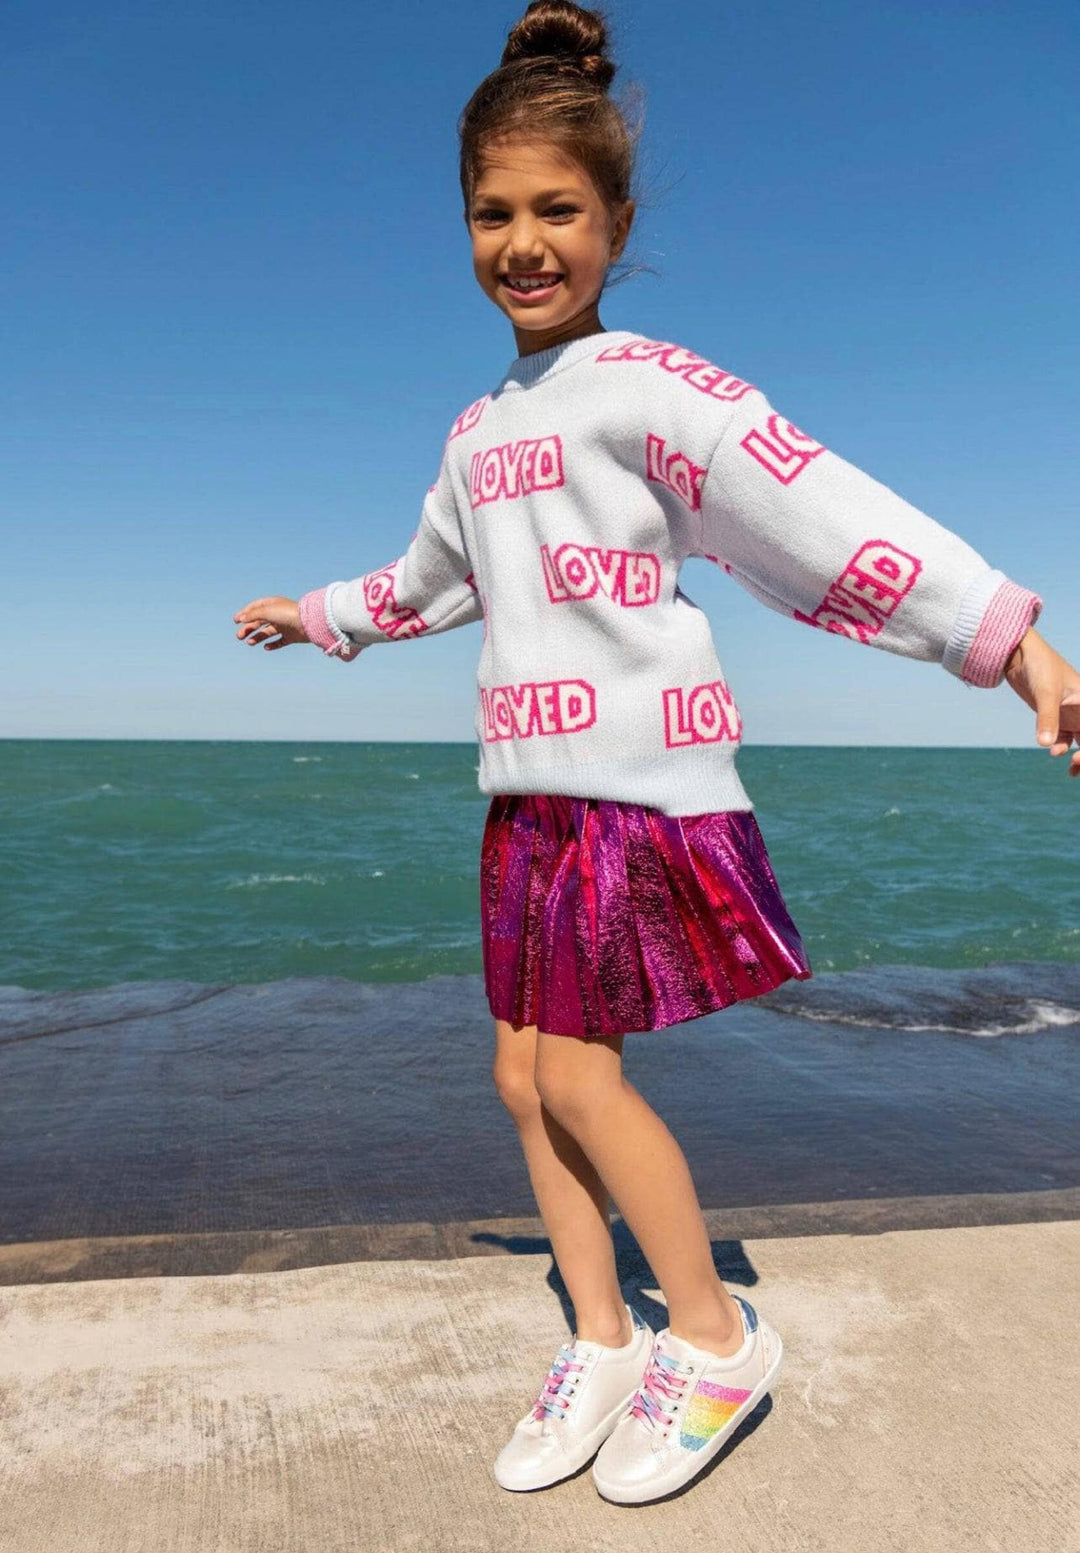 The Girls Hot Pink  Foil Pleated Skirt by Lola and the Boys